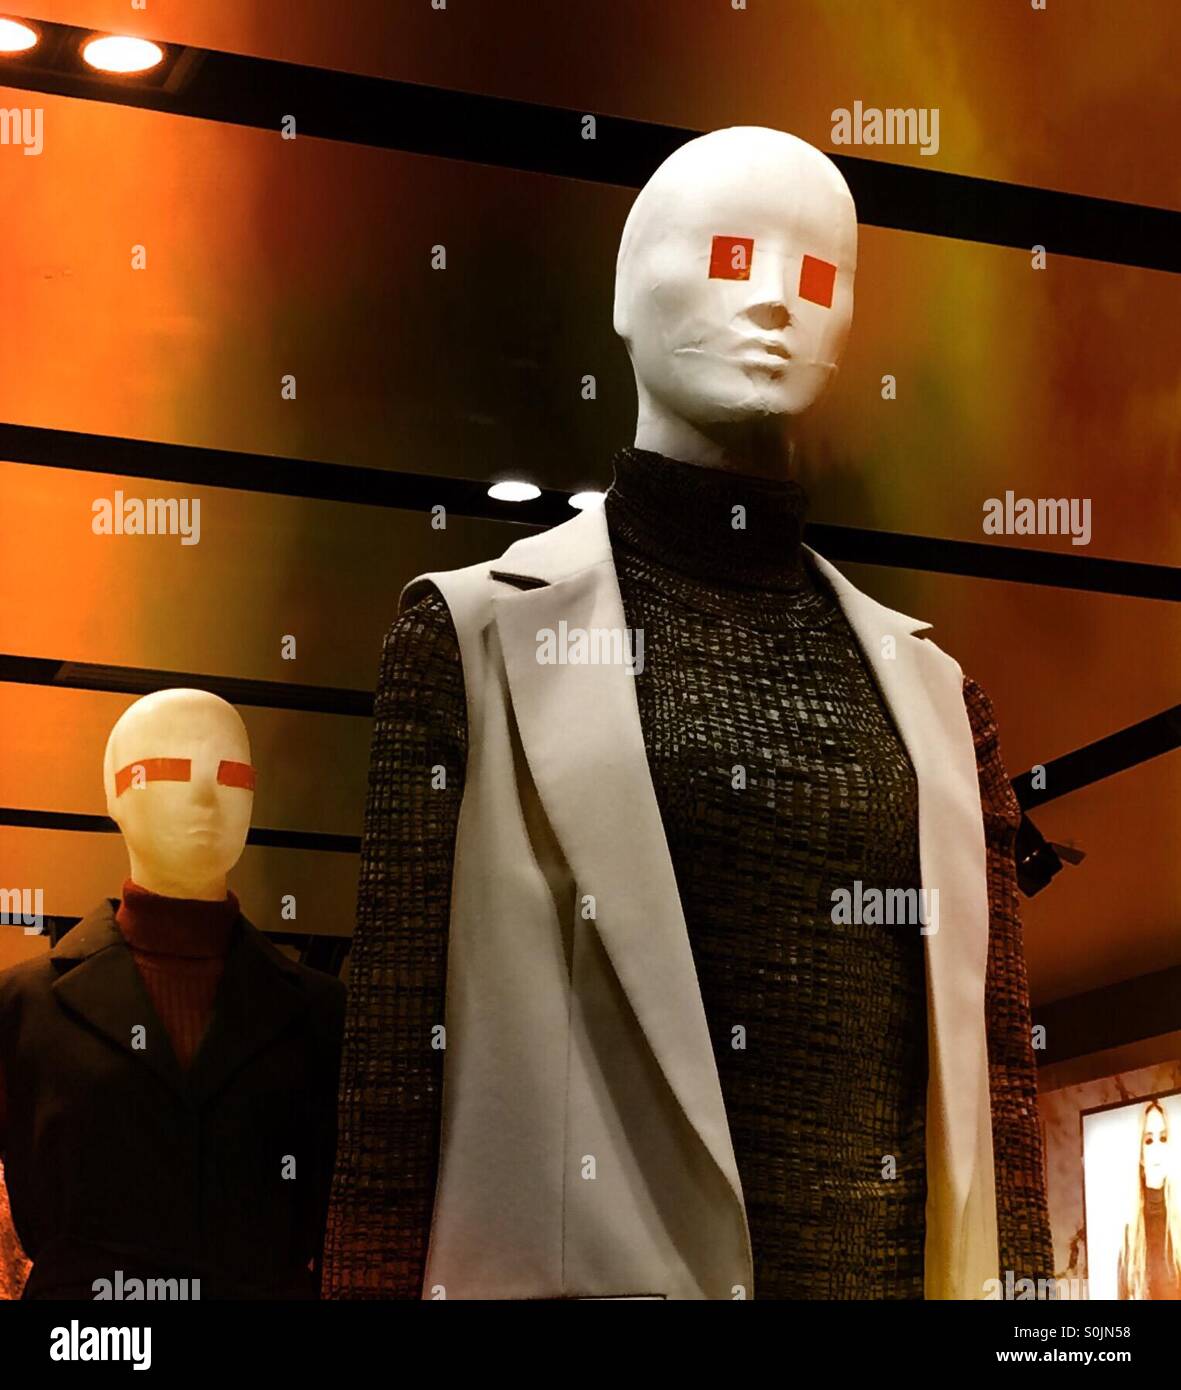 Shop mannequins with orange shapes for eyes Stock Photo - Alamy